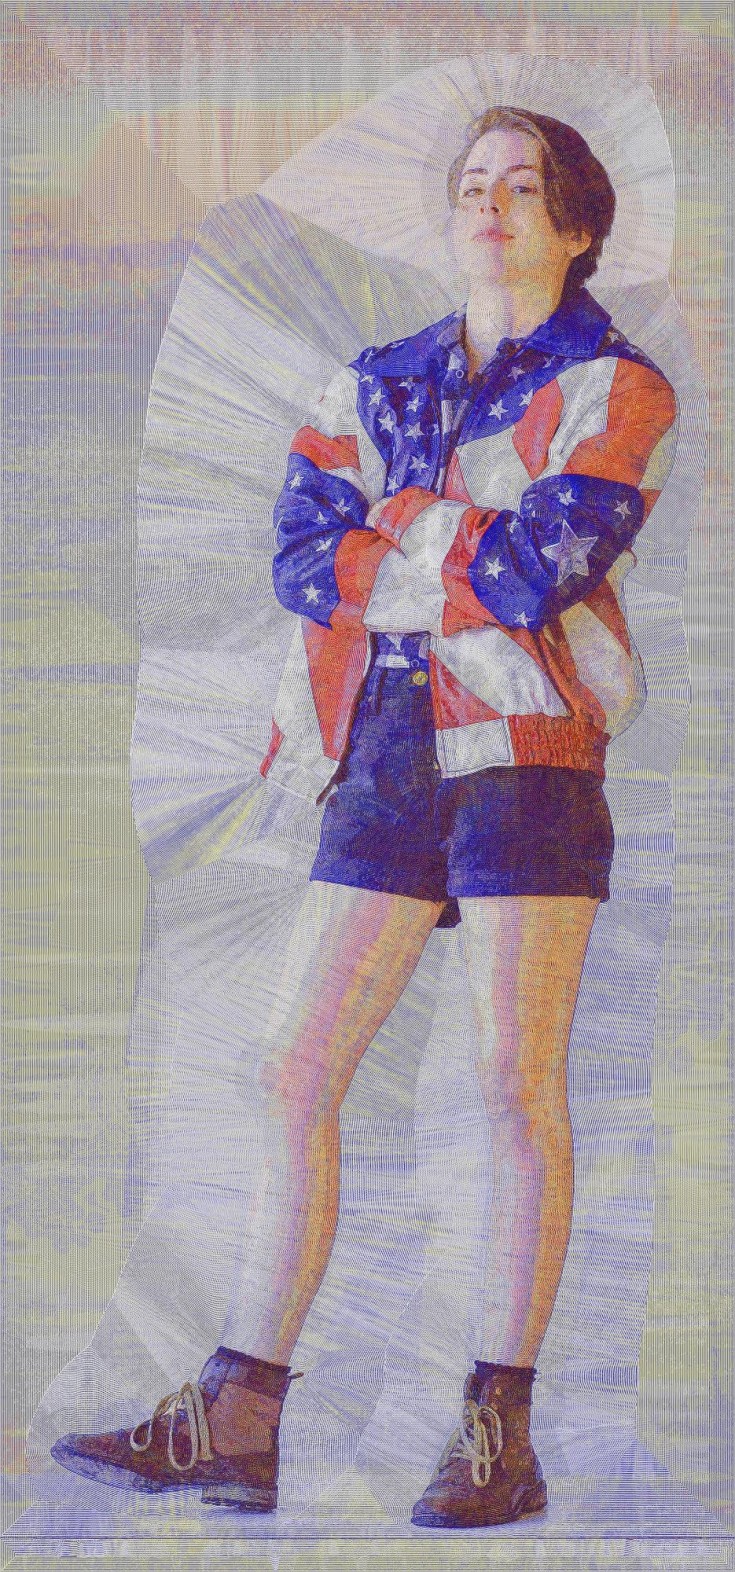 "Carrie Americana" 2014, 80 x 42 inches, archival print on aluminum